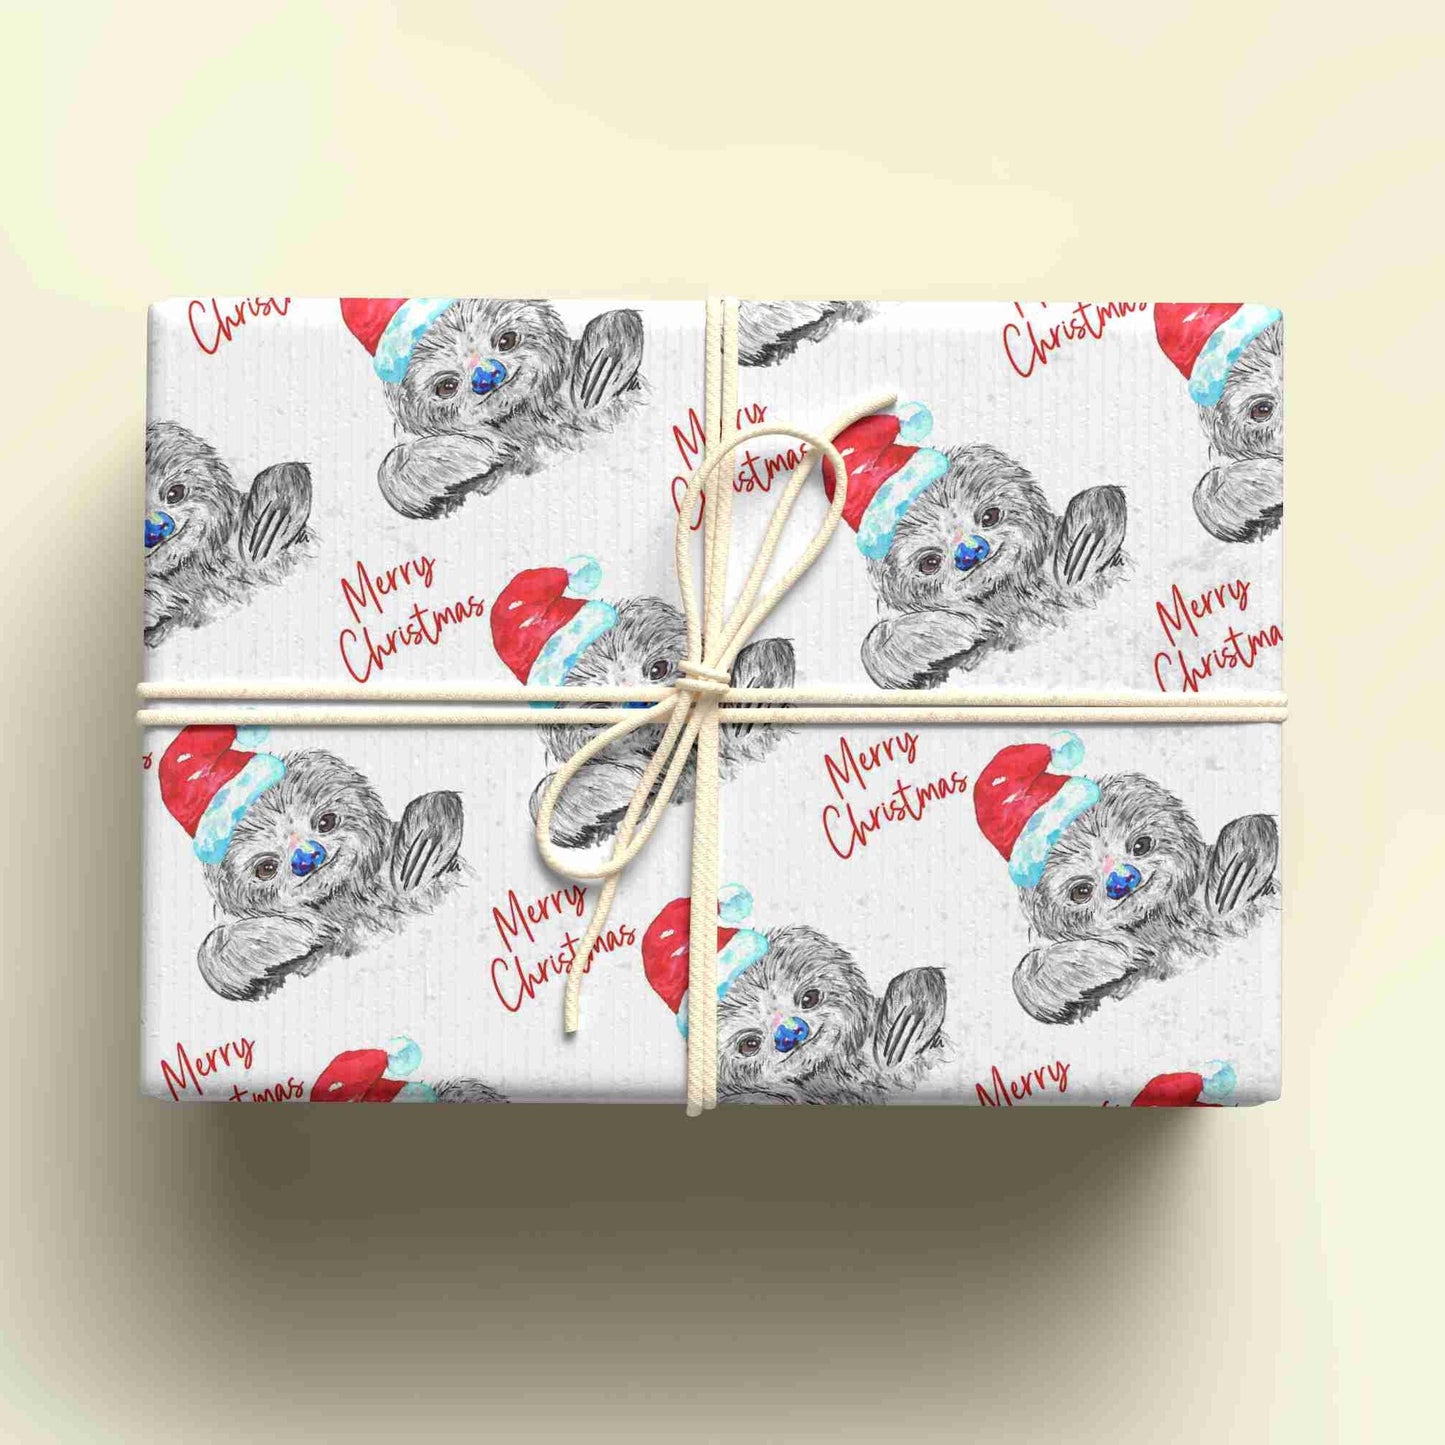 Personalised Christmas Sloth Wrapping Paper - Custom Name Gift Wrap - Sloth Design - Unique Xmas Gift Wrap